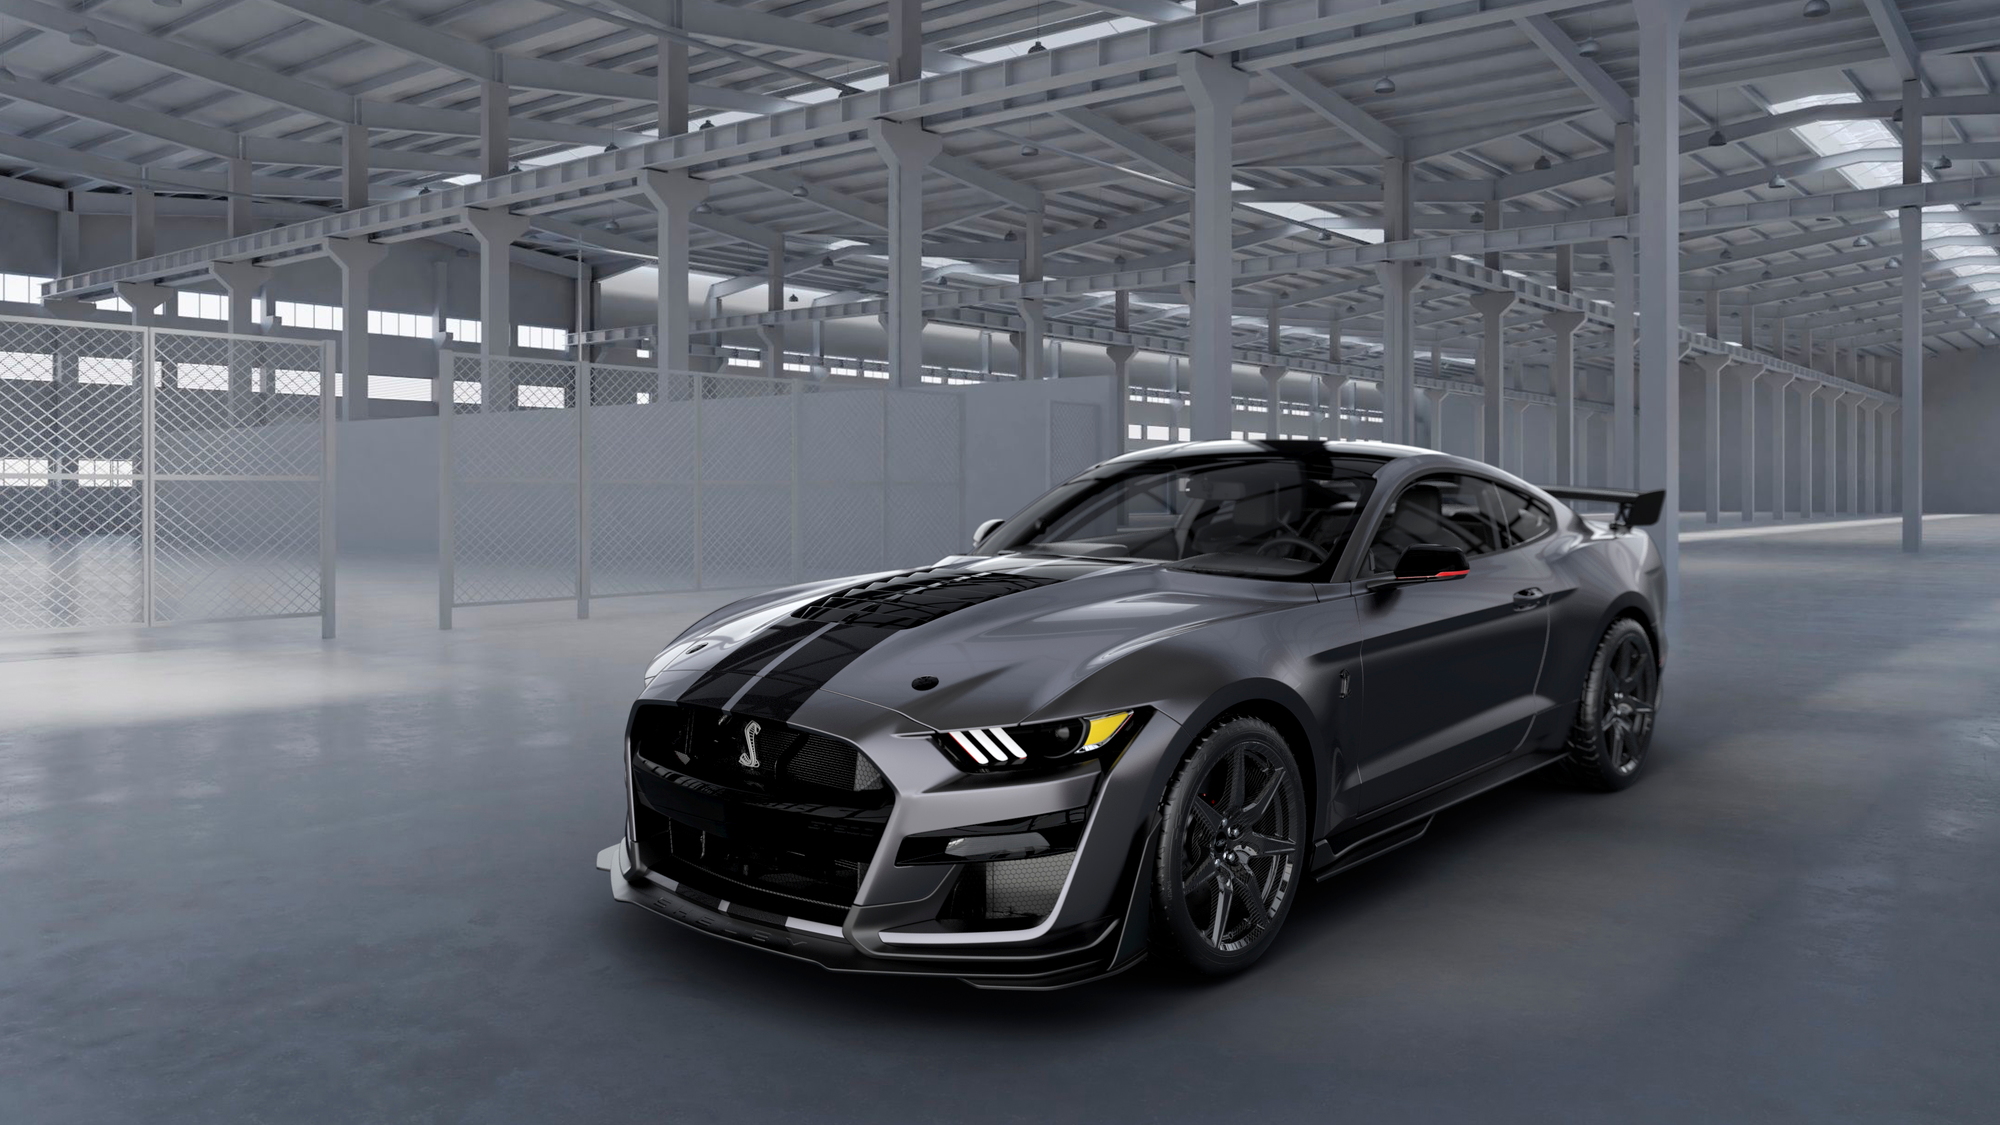 2020 Ford Mustang Shelby GT500 in Venom paint